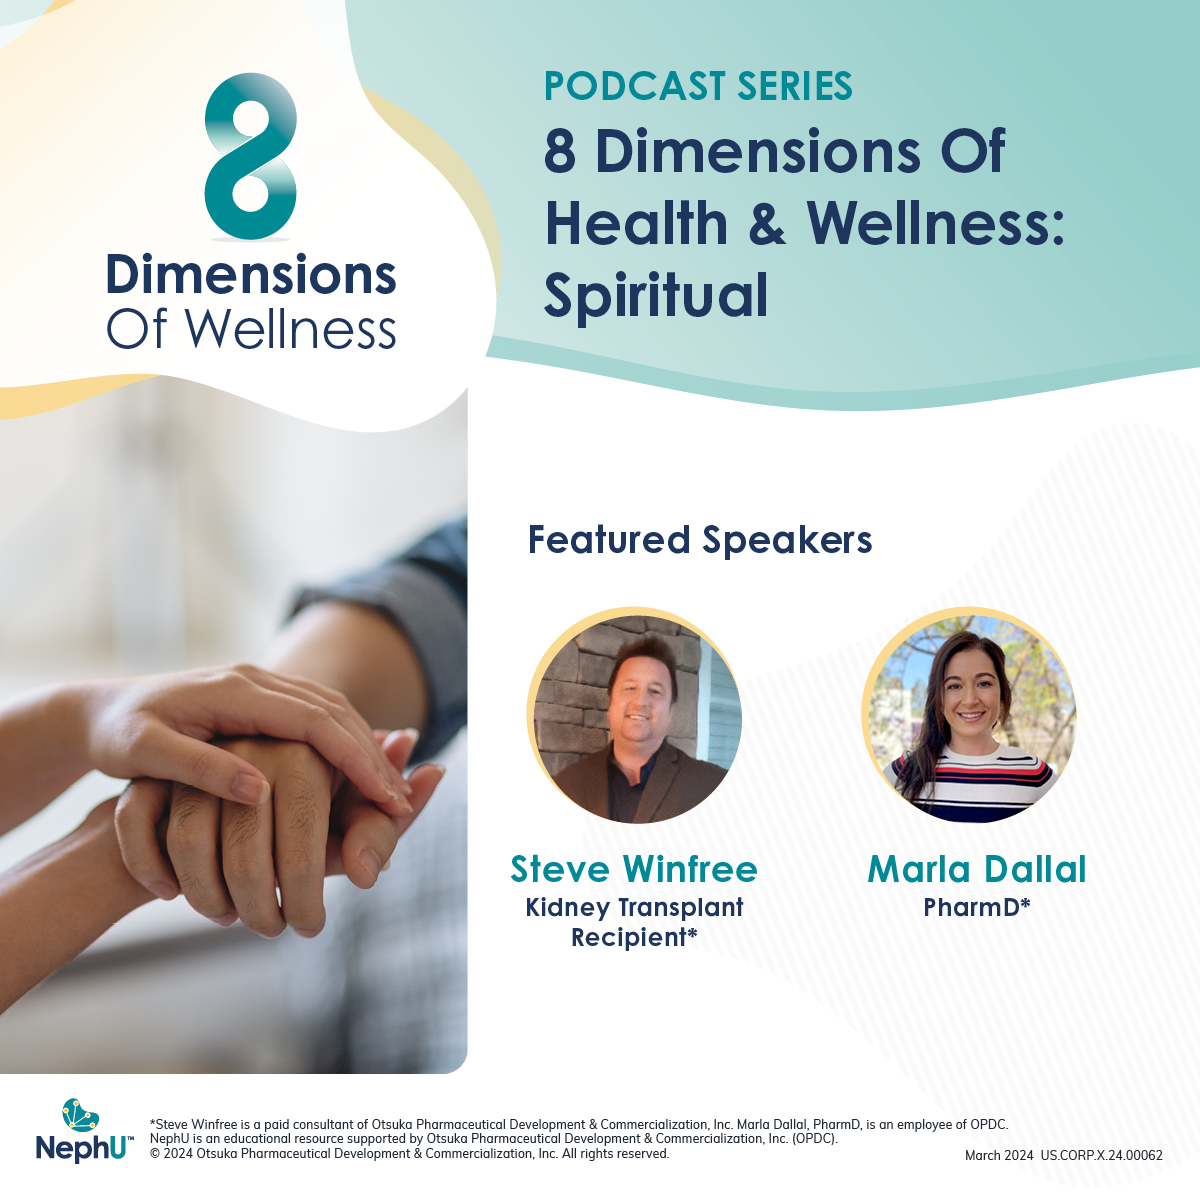 As part of NephU's Dimensions of Wellness series, Steve Winfree discusses his kidney disease journey, from diagnosis to transplant, and how spiritual wellness played its part. Listen in now! go.nephu.org/M56_ #Wellness #KidneyFailure #KidneyHealth #NephU #KidneyTransplant